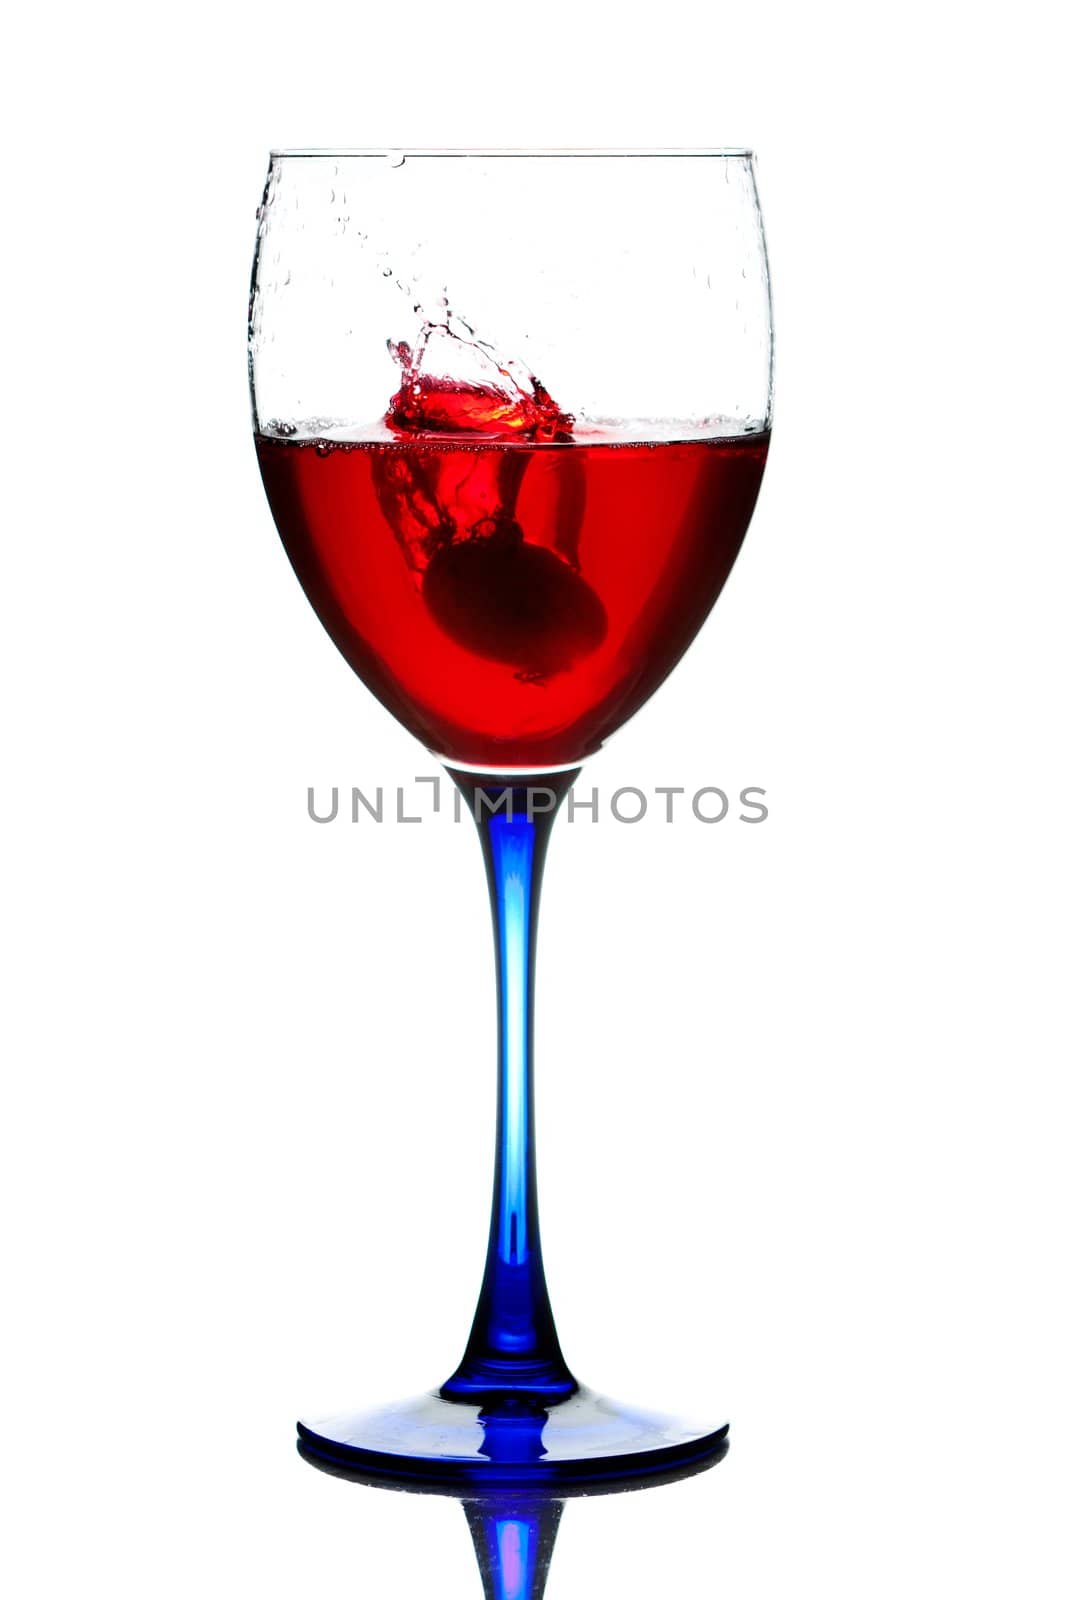 The red wine pouring into a wine glass.